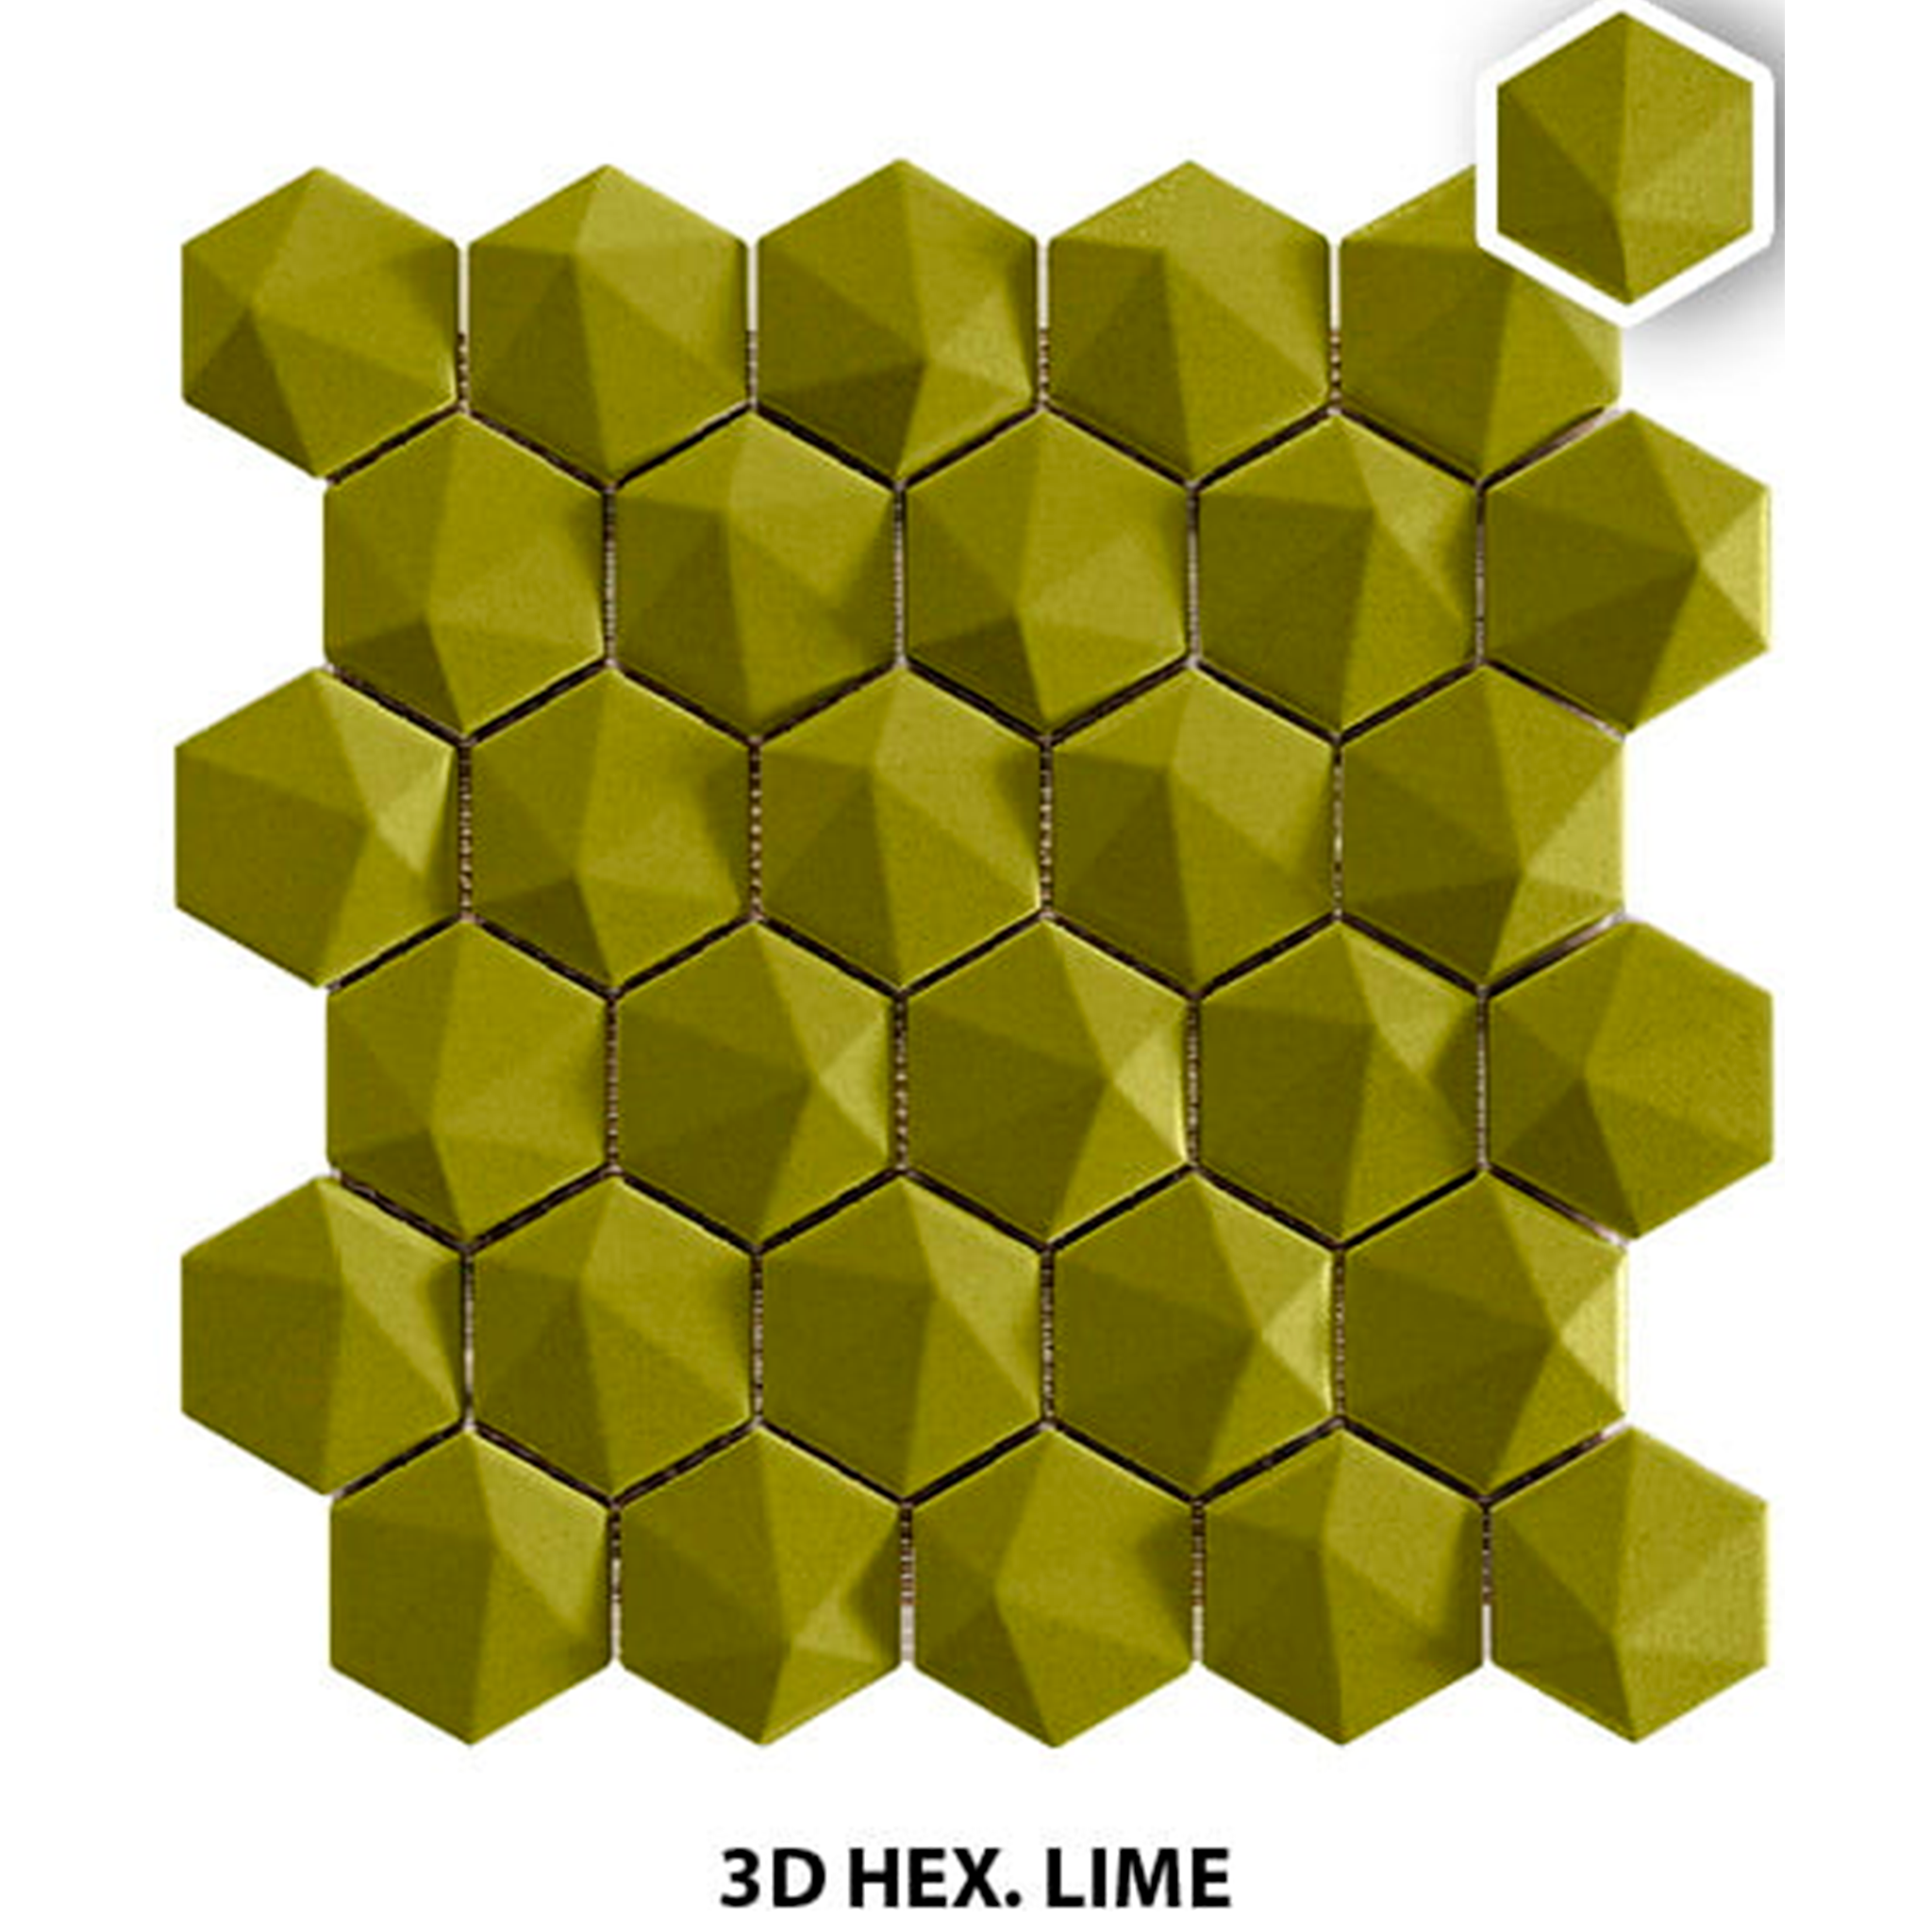 3Dhex Lime